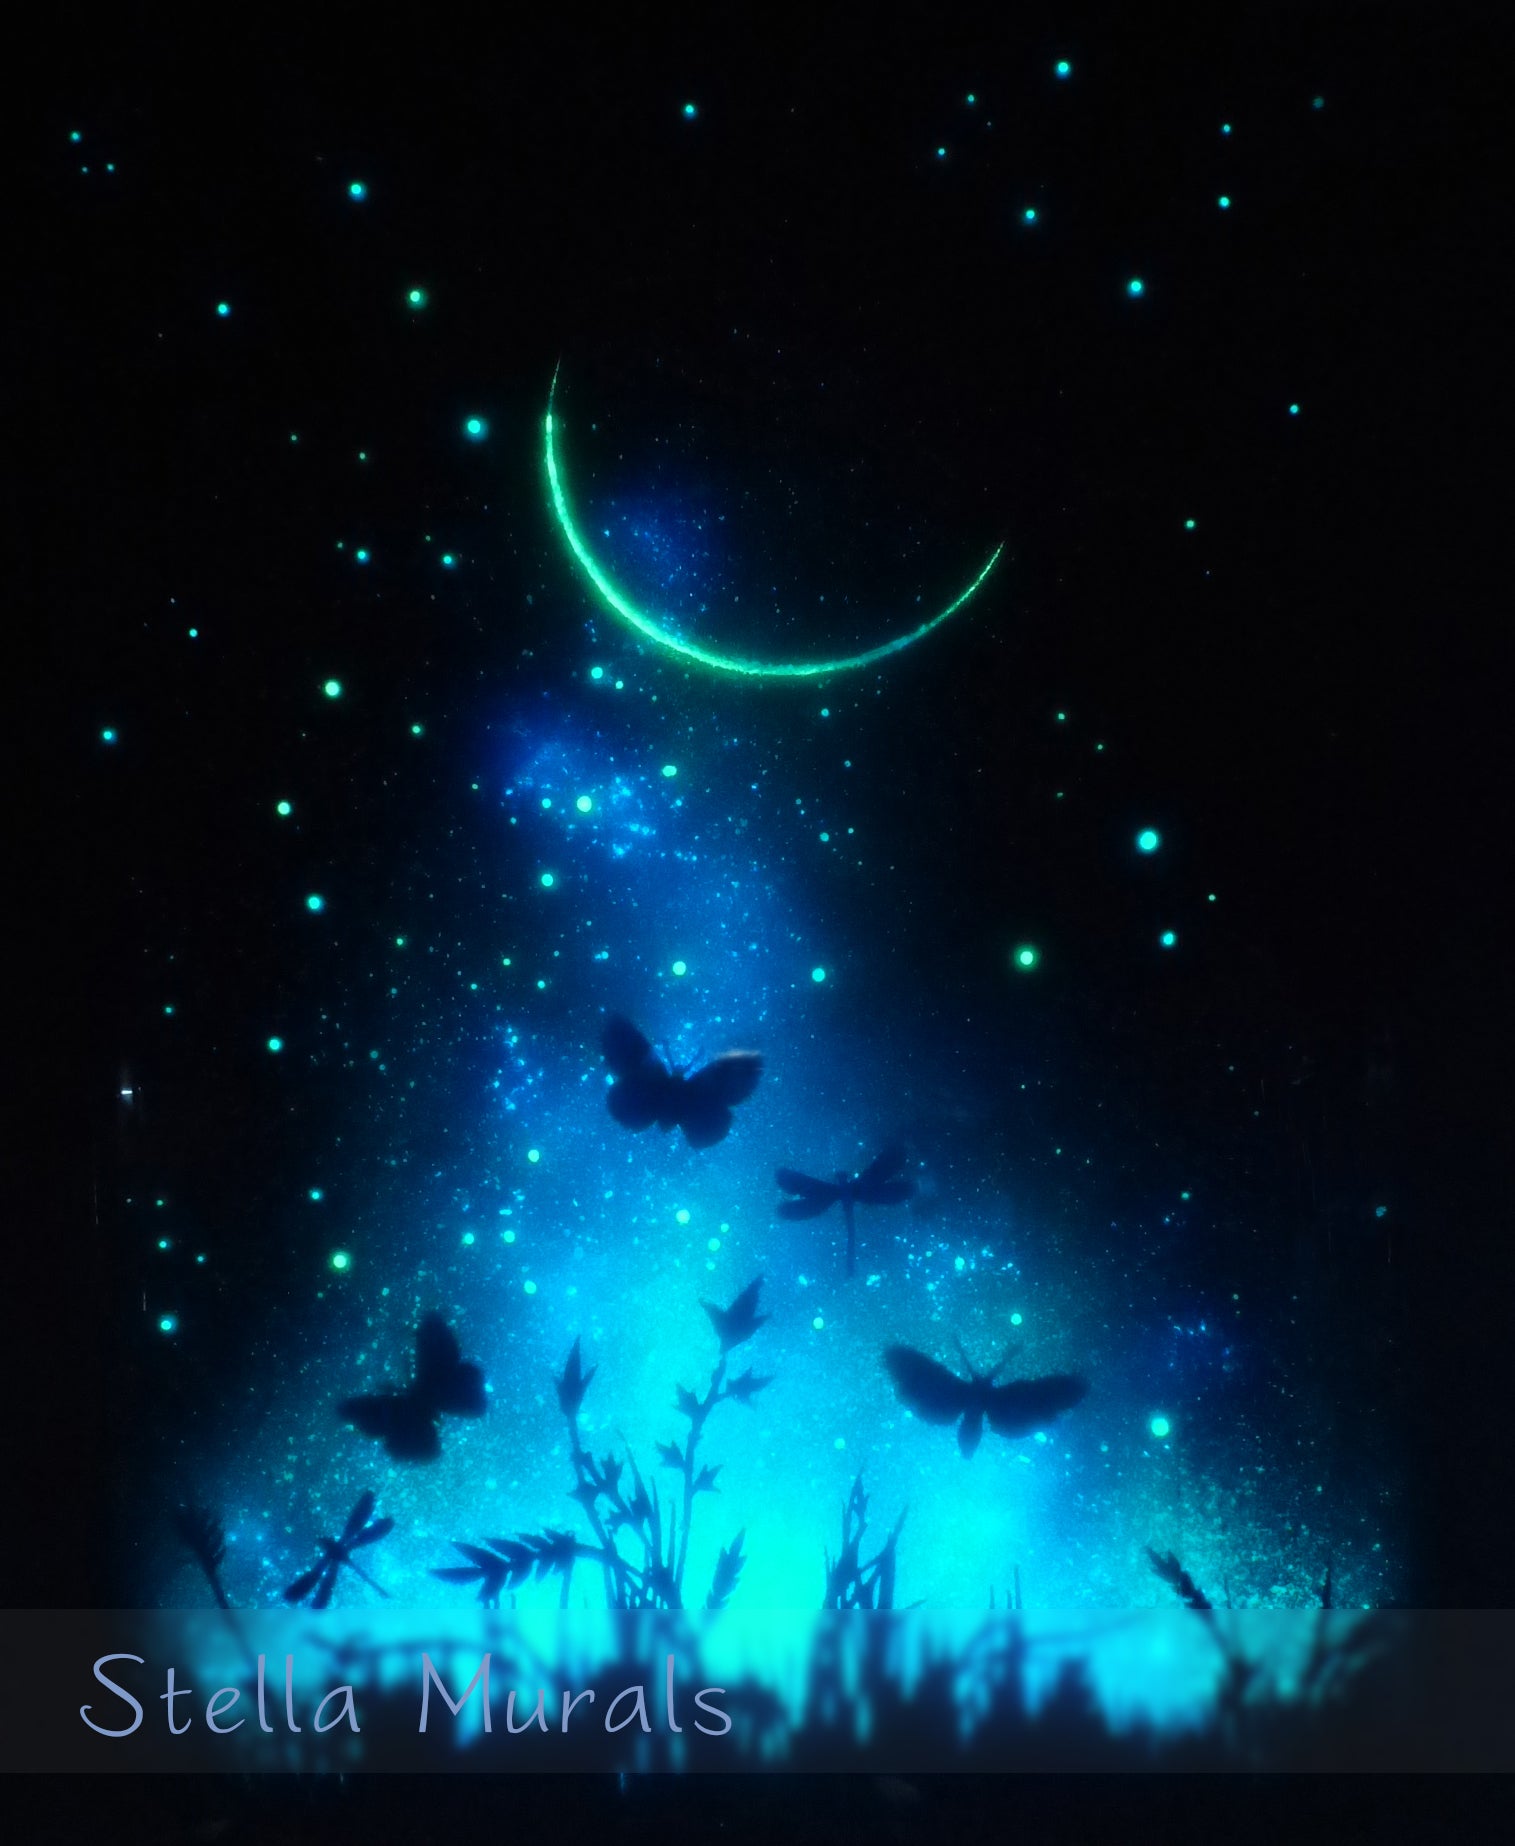 Glow in the dark meadow with crescent moon, moths and butterfly silhouettes. A glow in the dark poster for summer nights to transform the bedroom wall into starry night scene.